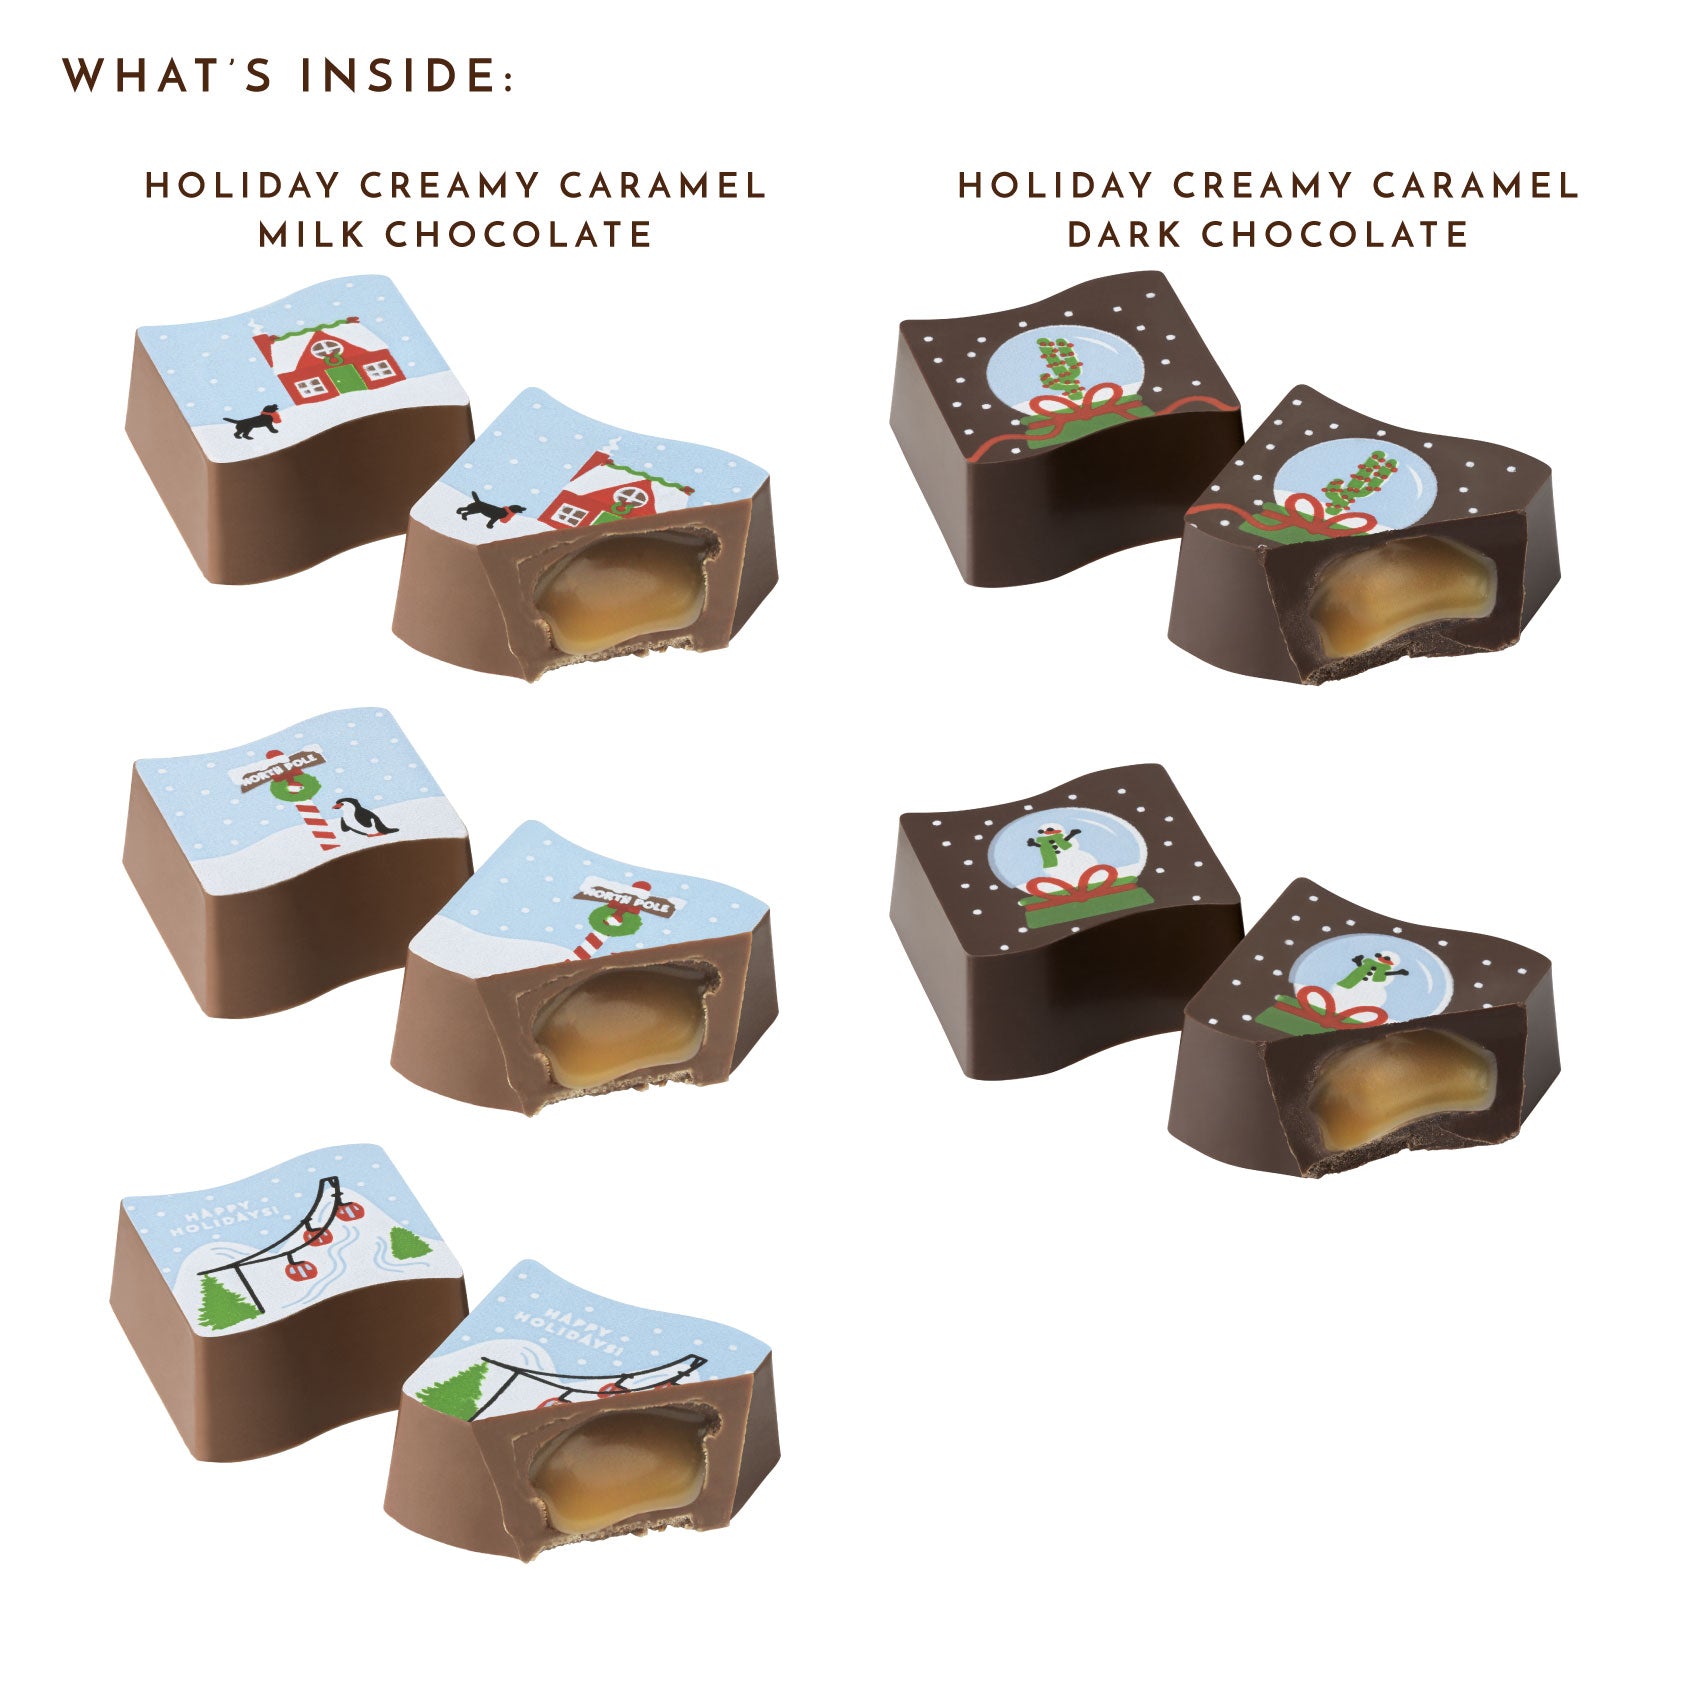 What's Inside Ethel M Chocolates Holiday Creamy Caramels Sampler, 5-Piece